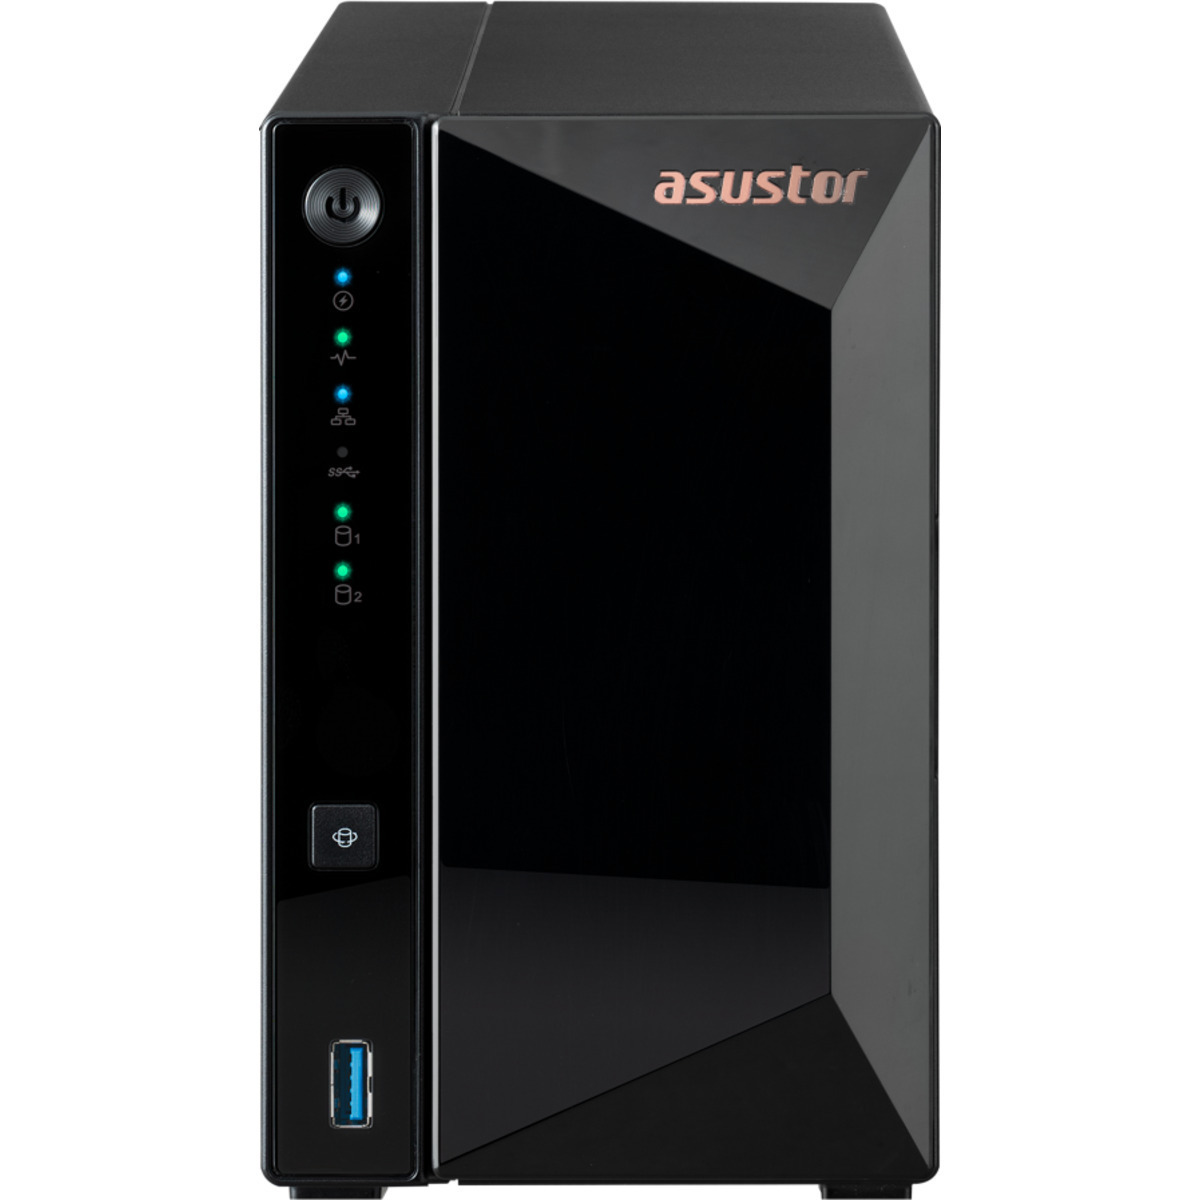 ASUSTOR DRIVESTOR 2 Pro Gen2 AS3302T v2 4tb 2-Bay Desktop Personal / Basic Home / Small Office NAS - Network Attached Storage Device 1x4tb Toshiba MN Series MN08ADA400E 3.5 7200rpm SATA 6Gb/s HDD NAS Class Drives Installed - Burn-In Tested - ON SALE DRIVESTOR 2 Pro Gen2 AS3302T v2